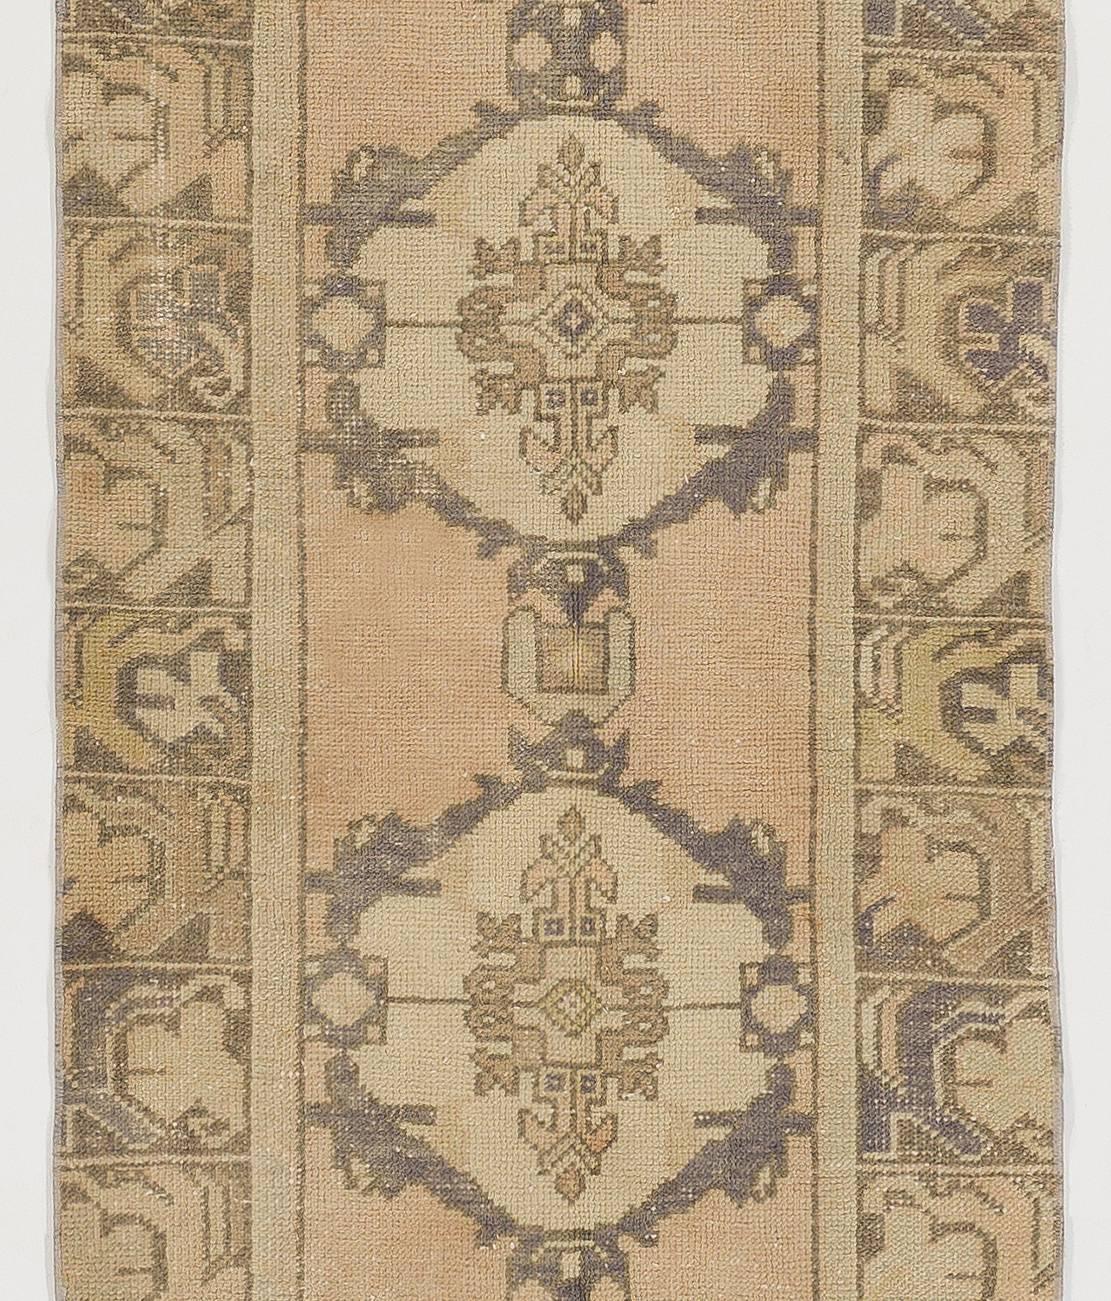 A midcentury hand-knotted village rug from Central Turkey with soft medium wool pile and washed out colors.